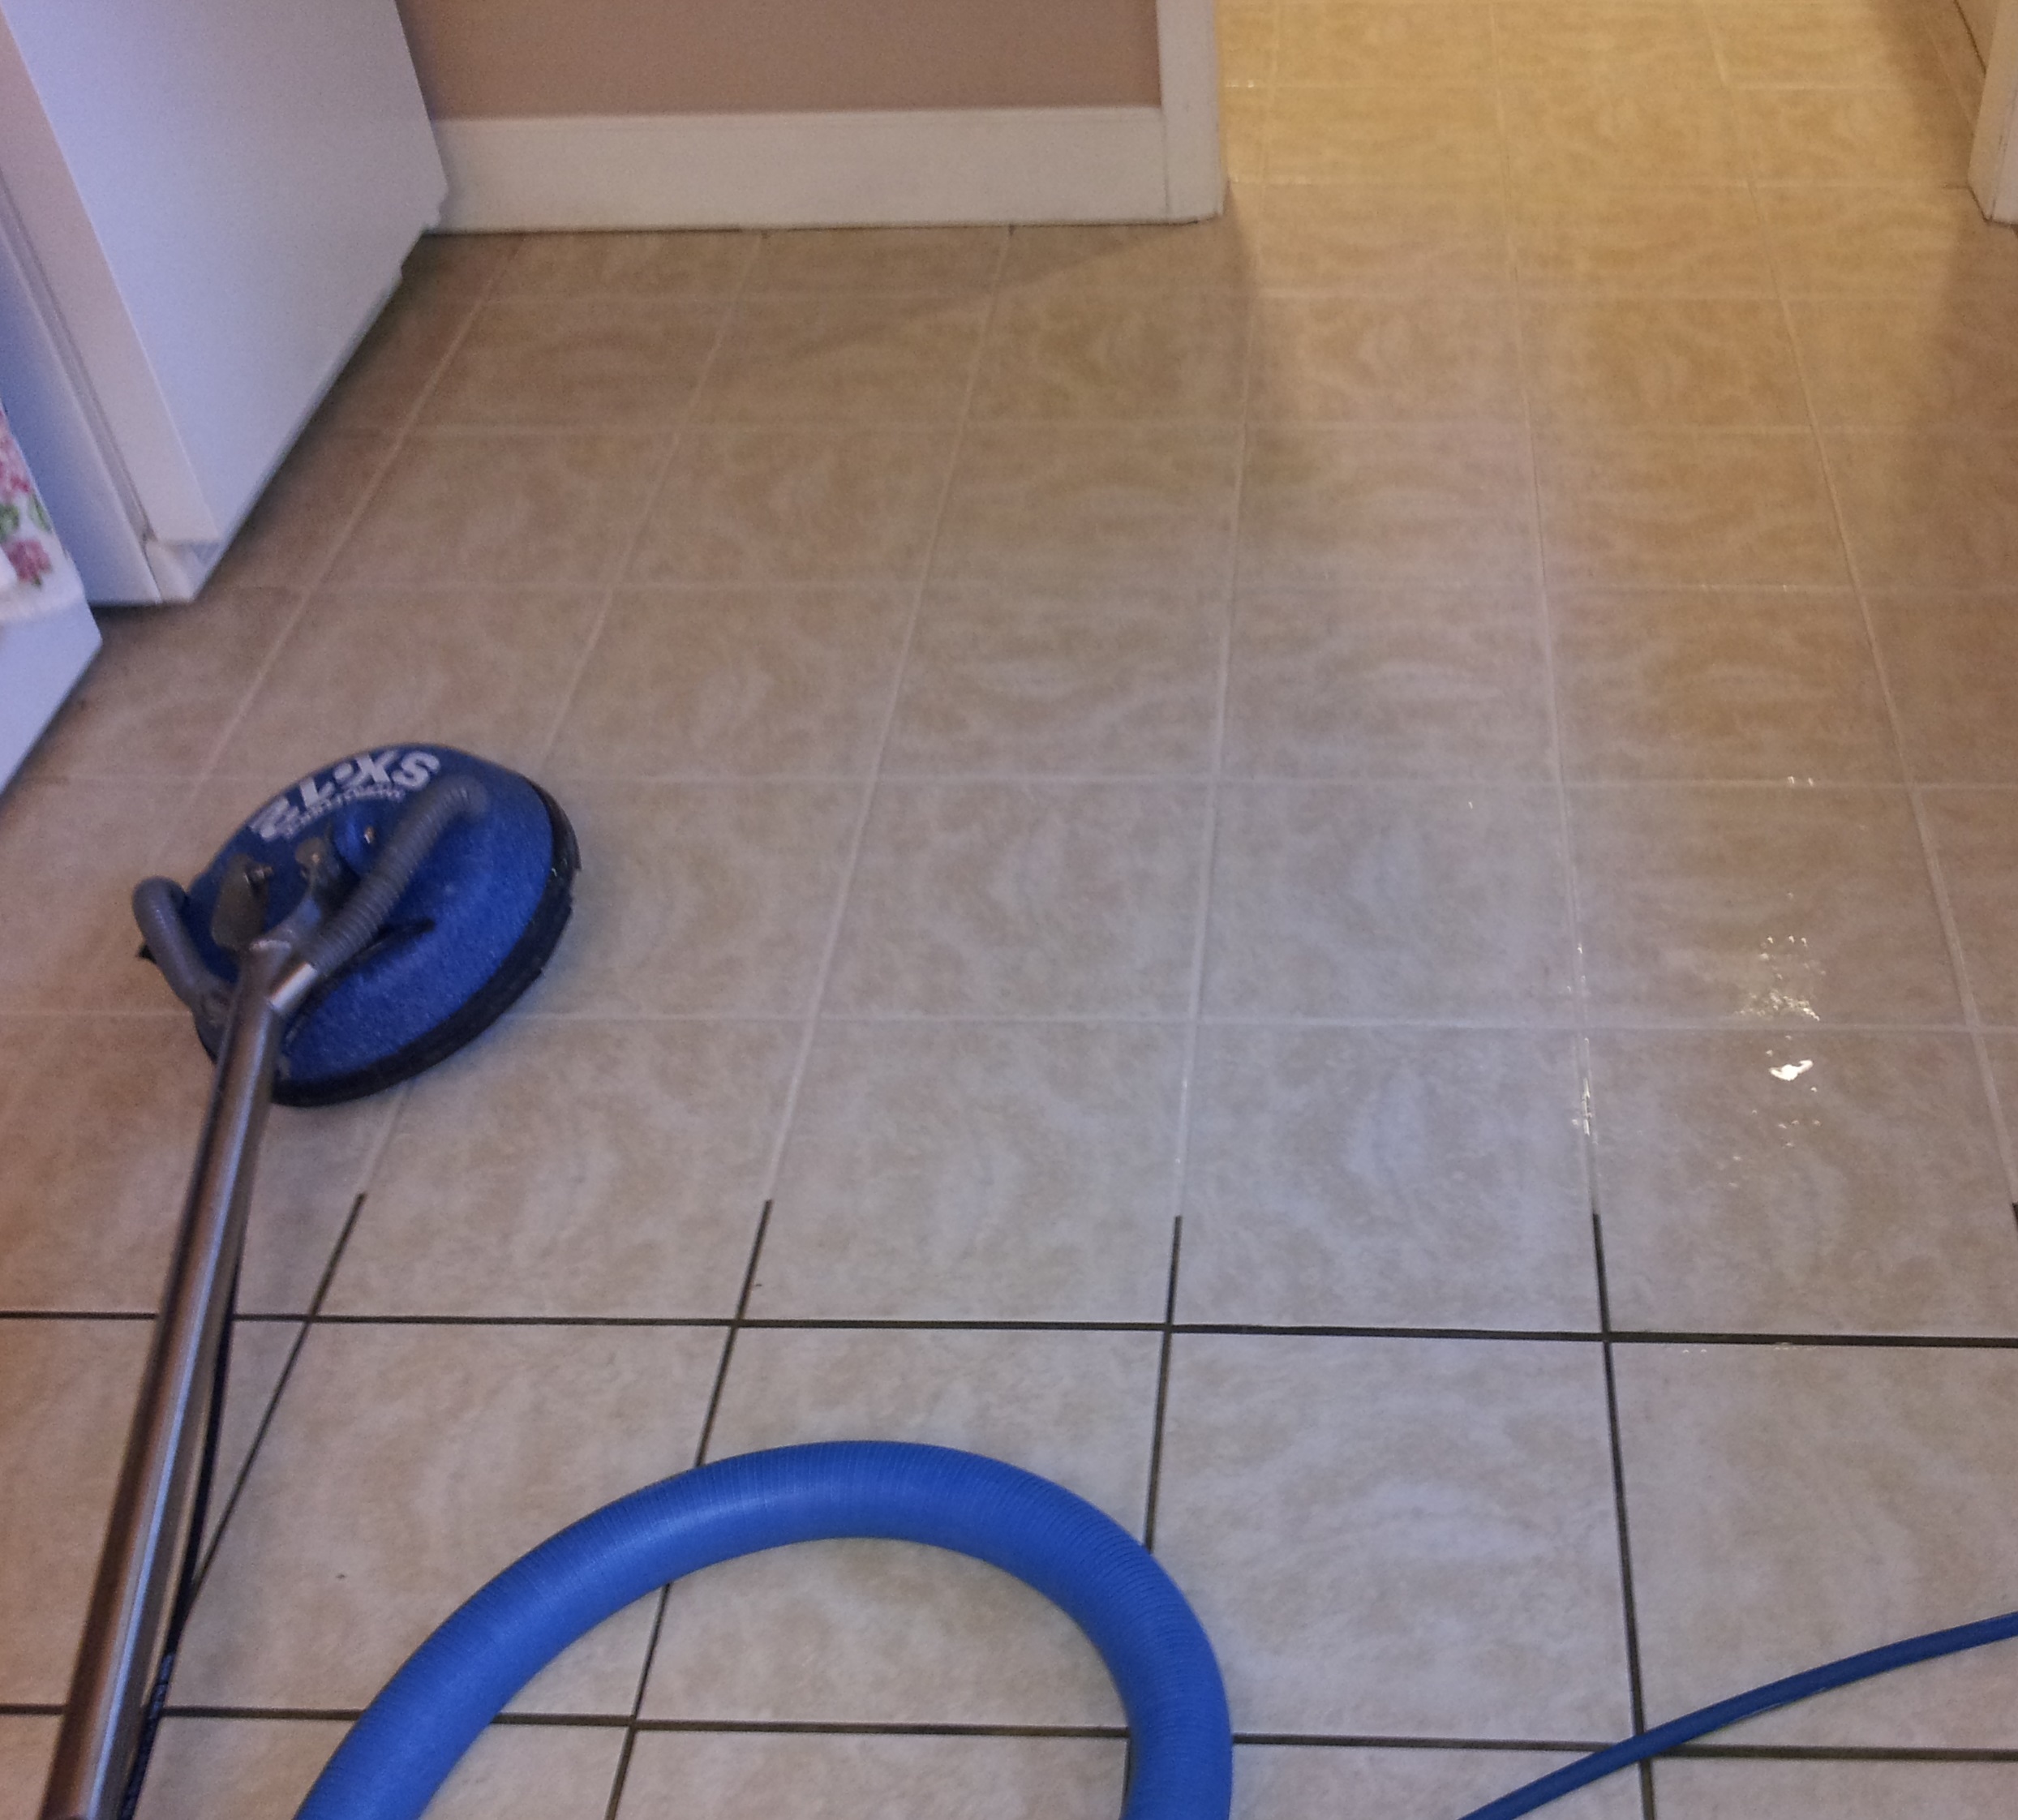 Tile Grout Cleaning Services Suwanee, How To Clean Grout On Ceramic Tile Floors